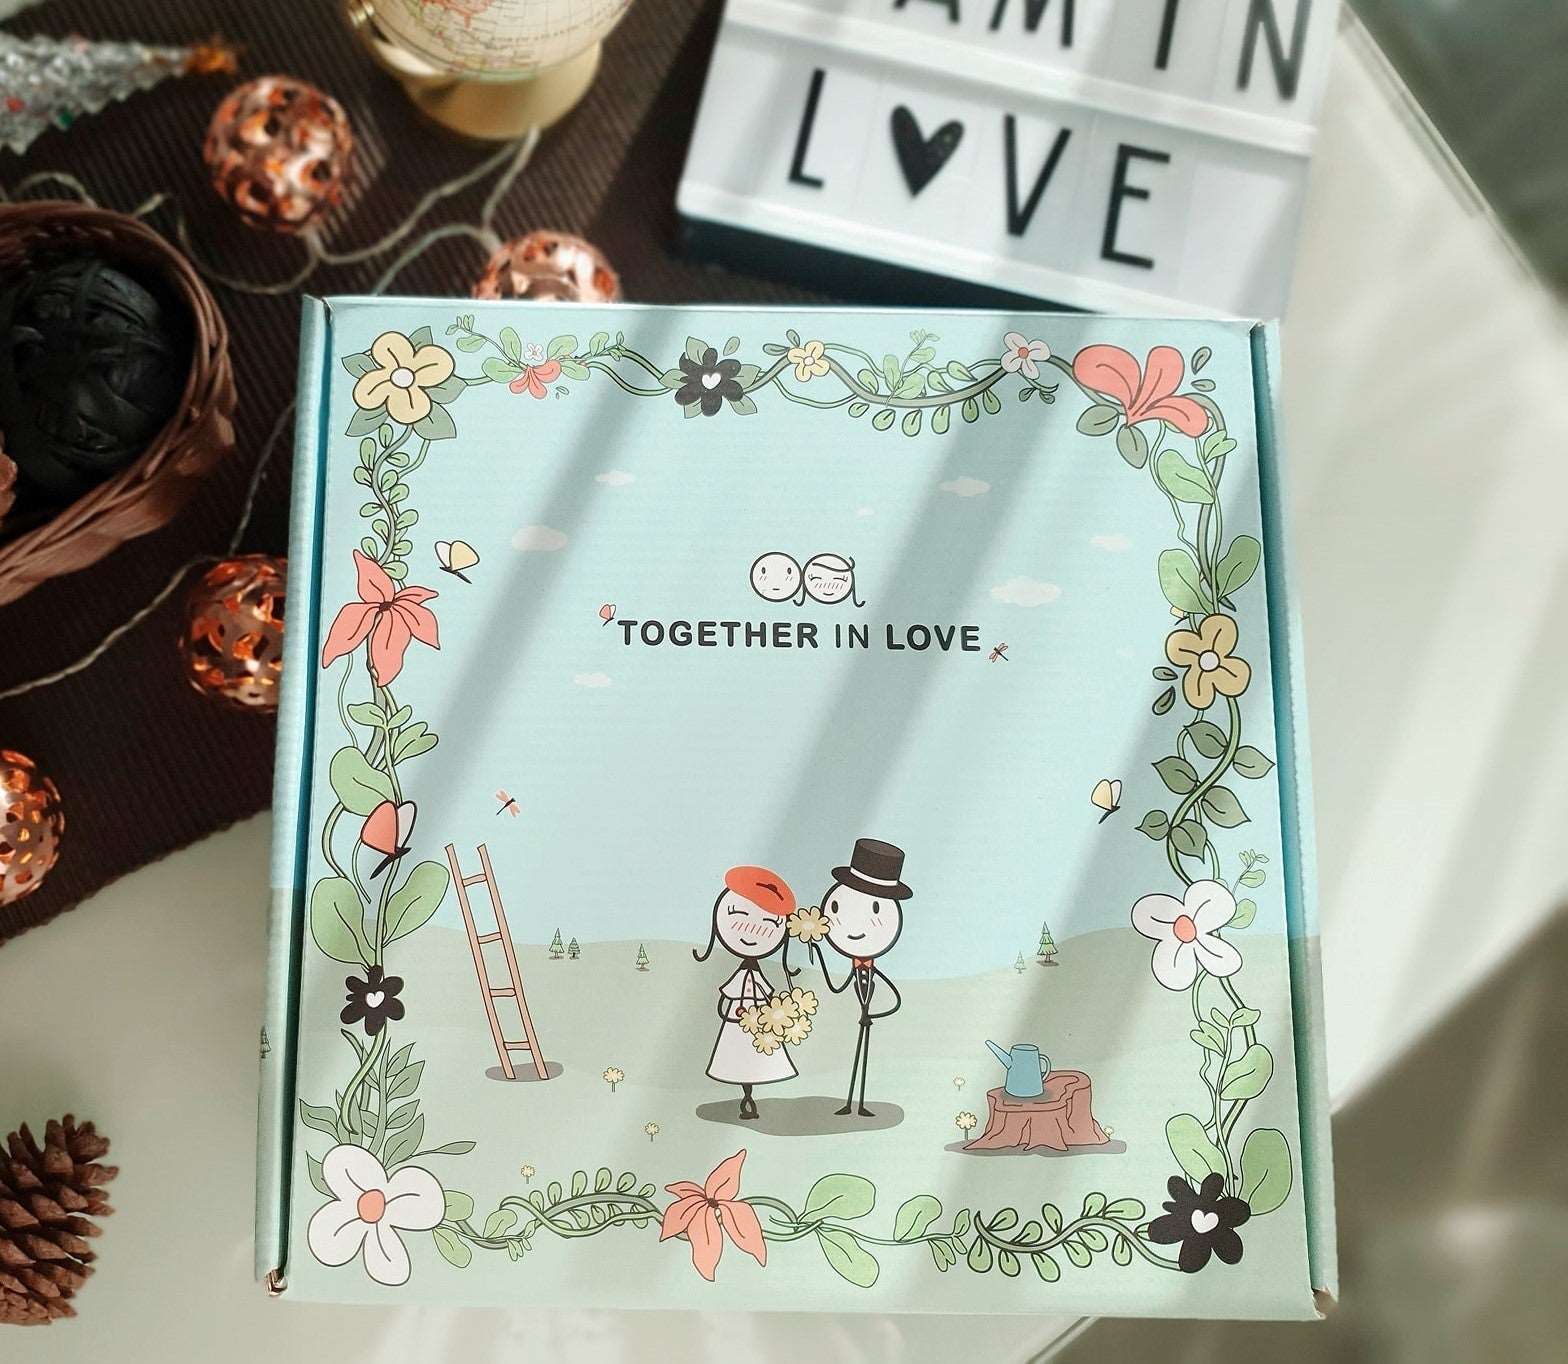 Say I love you everyday gift setHome & GardenHuman Touch OfficialLet your special someone know how much they mean to you with this 'Say I Love You every day' Giftset. This super-cute gift set is the perfect way to show you care an